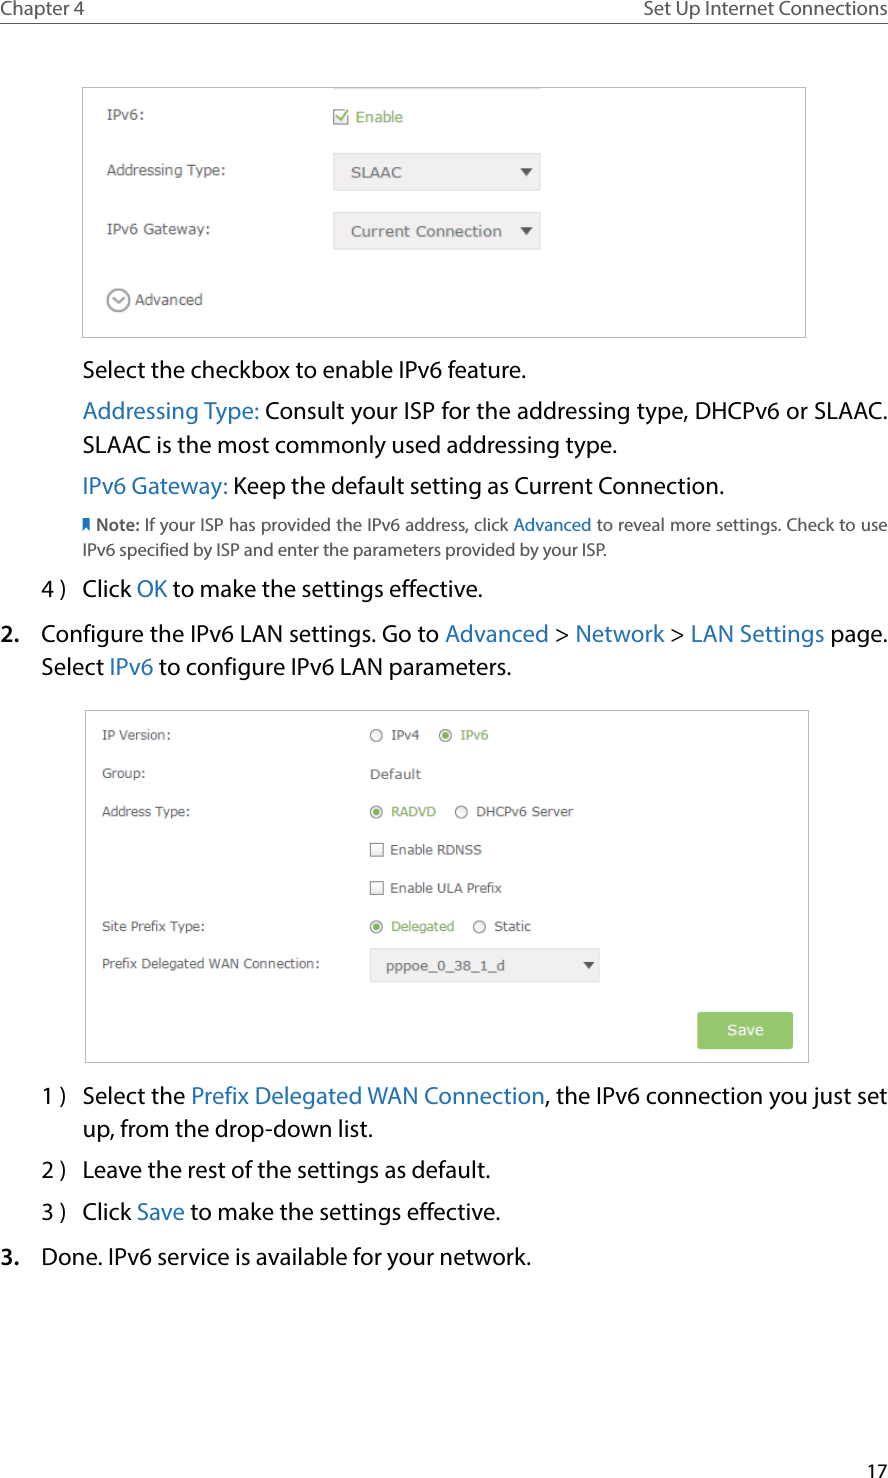 17Chapter 4 Set Up Internet ConnectionsSelect the checkbox to enable IPv6 feature.Addressing Type: Consult your ISP for the addressing type, DHCPv6 or SLAAC. SLAAC is the most commonly used addressing type.IPv6 Gateway: Keep the default setting as Current Connection.Note: If your ISP has provided the IPv6 address, click Advanced to reveal more settings. Check to use IPv6 specified by ISP and enter the parameters provided by your ISP.4 )  Click OK to make the settings effective.2.  Configure the IPv6 LAN settings. Go to Advanced &gt; Network &gt; LAN Settings page. Select IPv6 to configure IPv6 LAN parameters. 1 )  Select the Prefix Delegated WAN Connection, the IPv6 connection you just set up, from the drop-down list.2 )  Leave the rest of the settings as default.3 )  Click Save to make the settings effective.3.  Done. IPv6 service is available for your network.